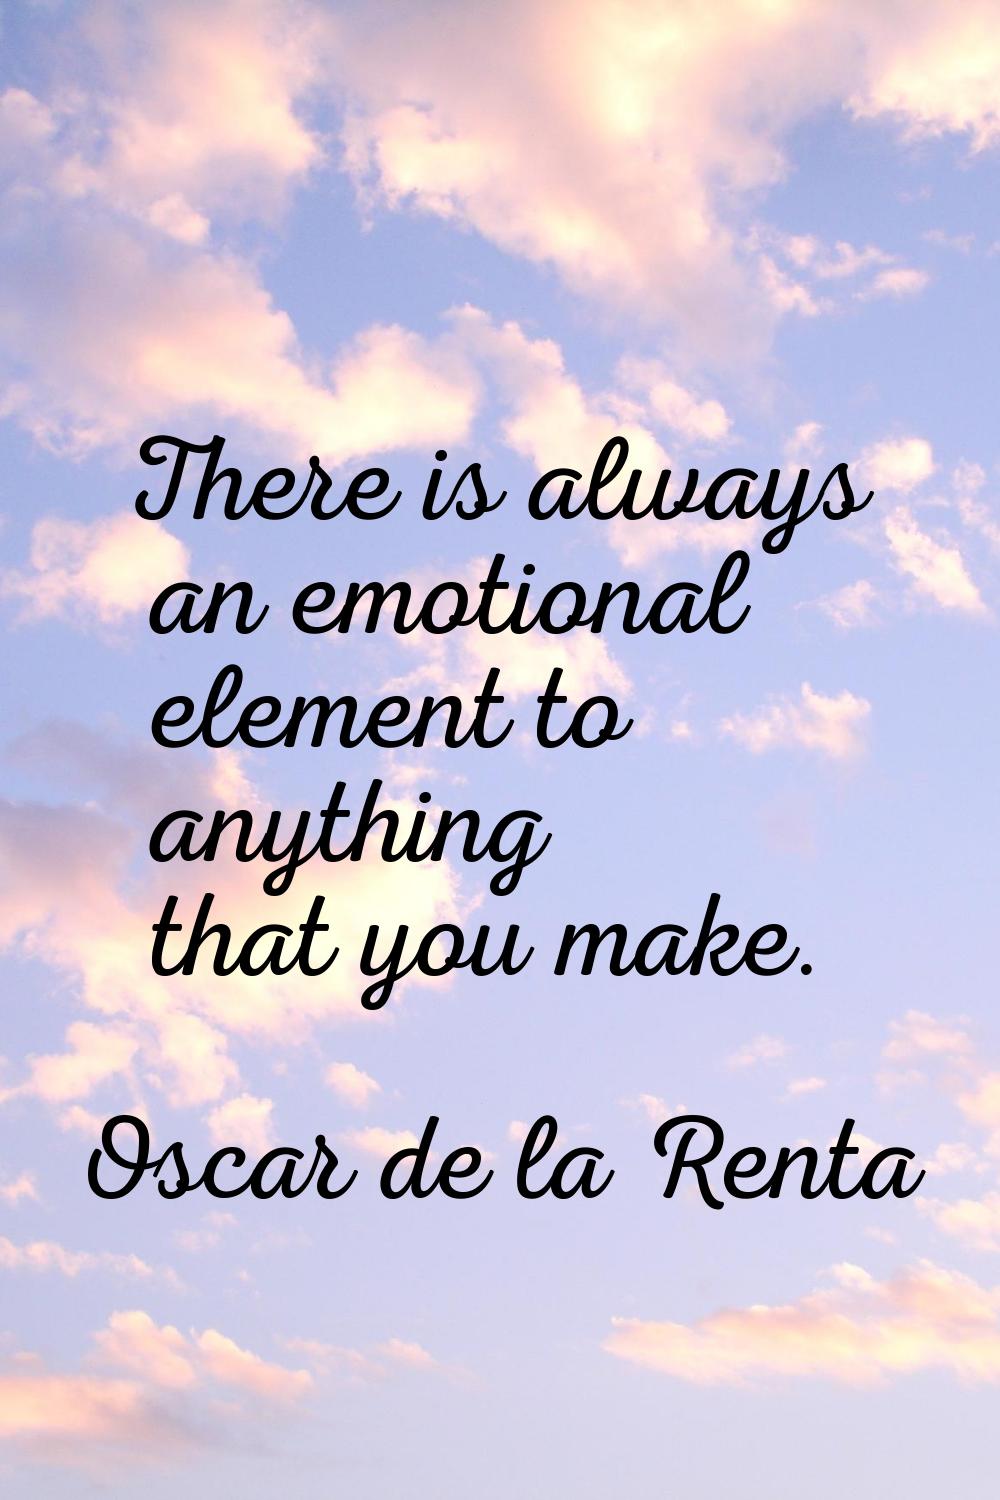 There is always an emotional element to anything that you make.